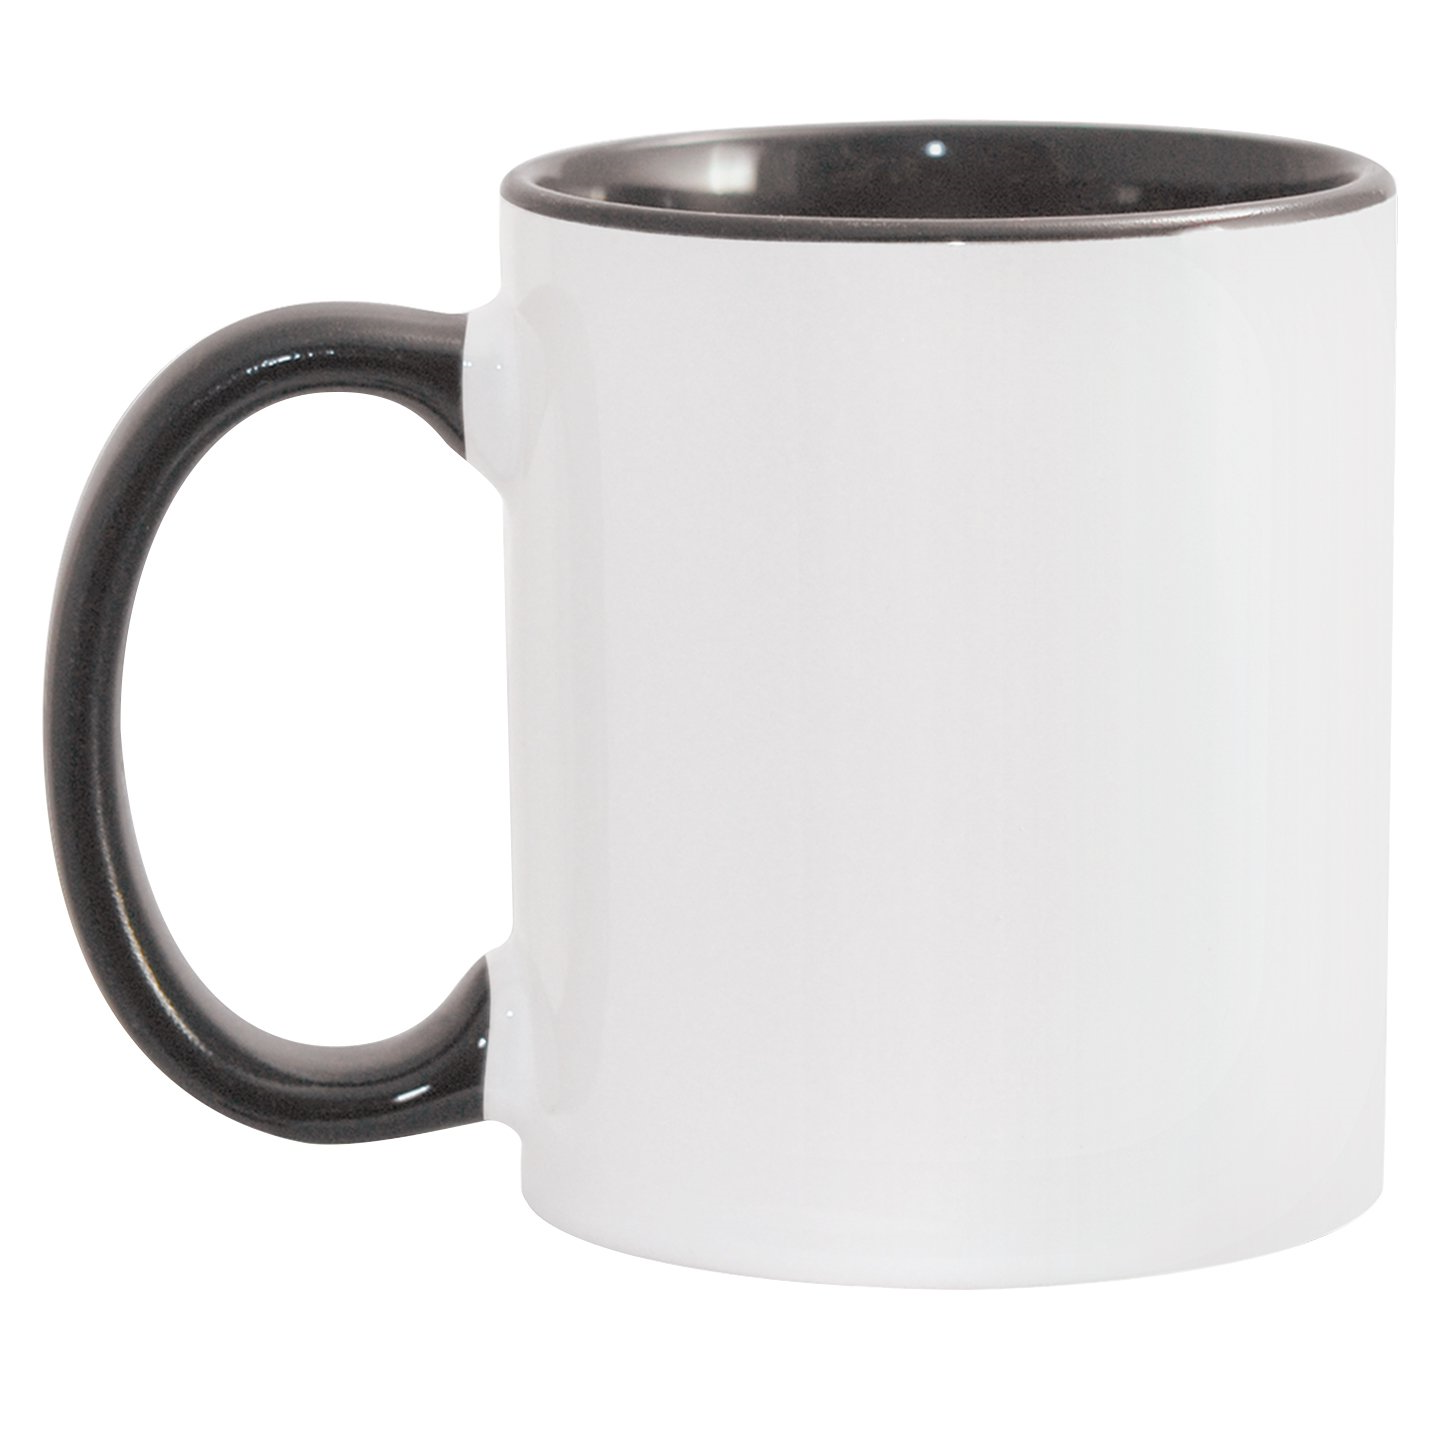 FBA Case of 11oz or 15oz TWO TONE Mugs (Qty 6) - FBA and other pre-paid shipping labels